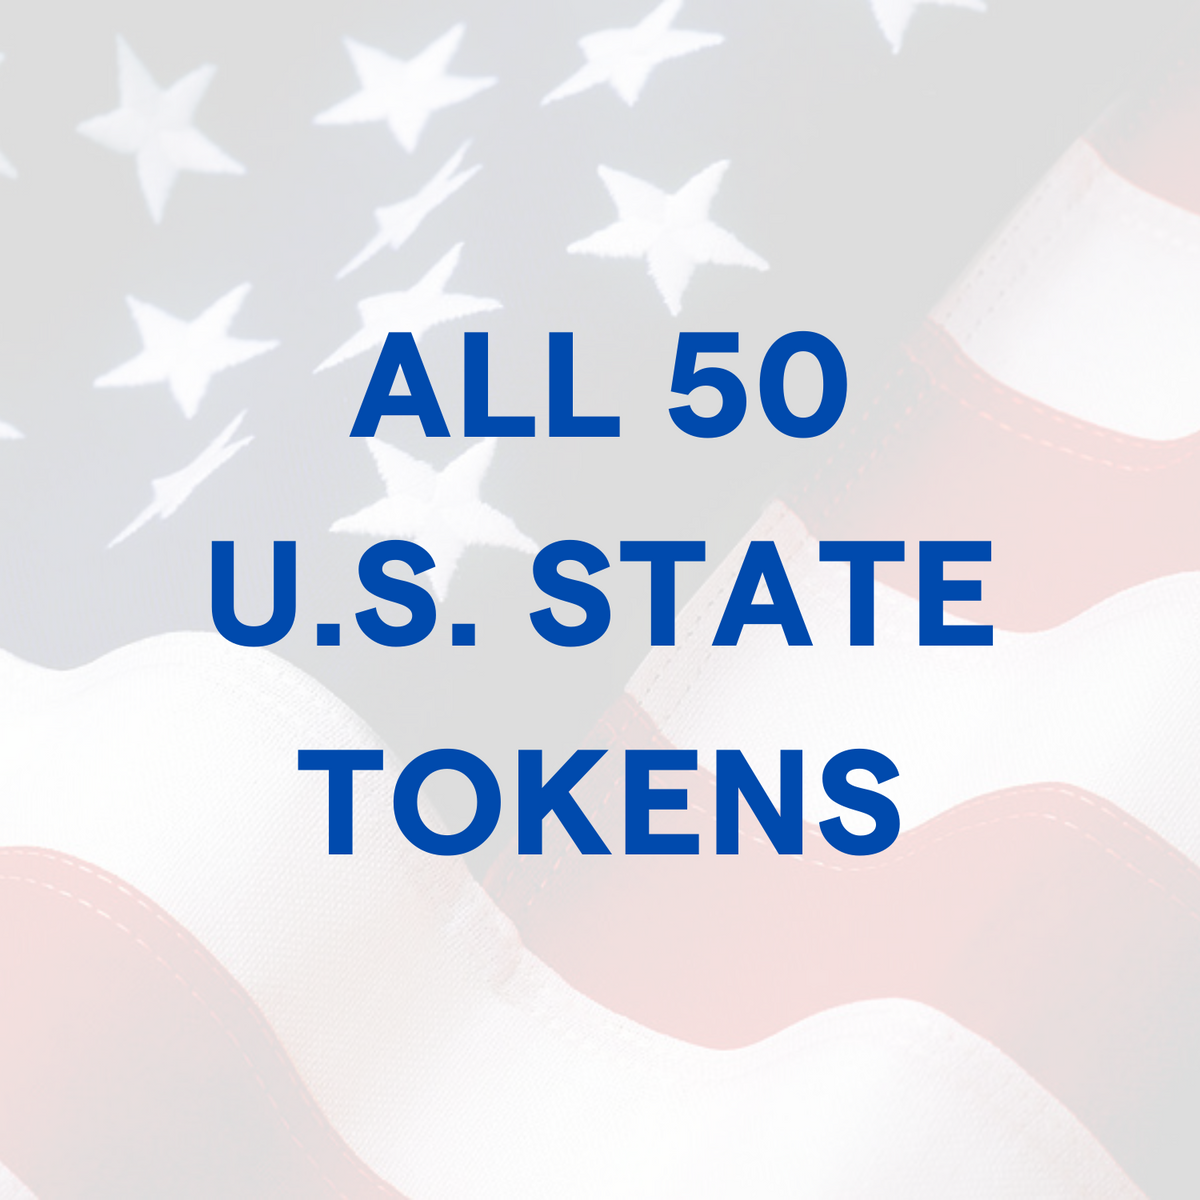 All 50 US State Tokens